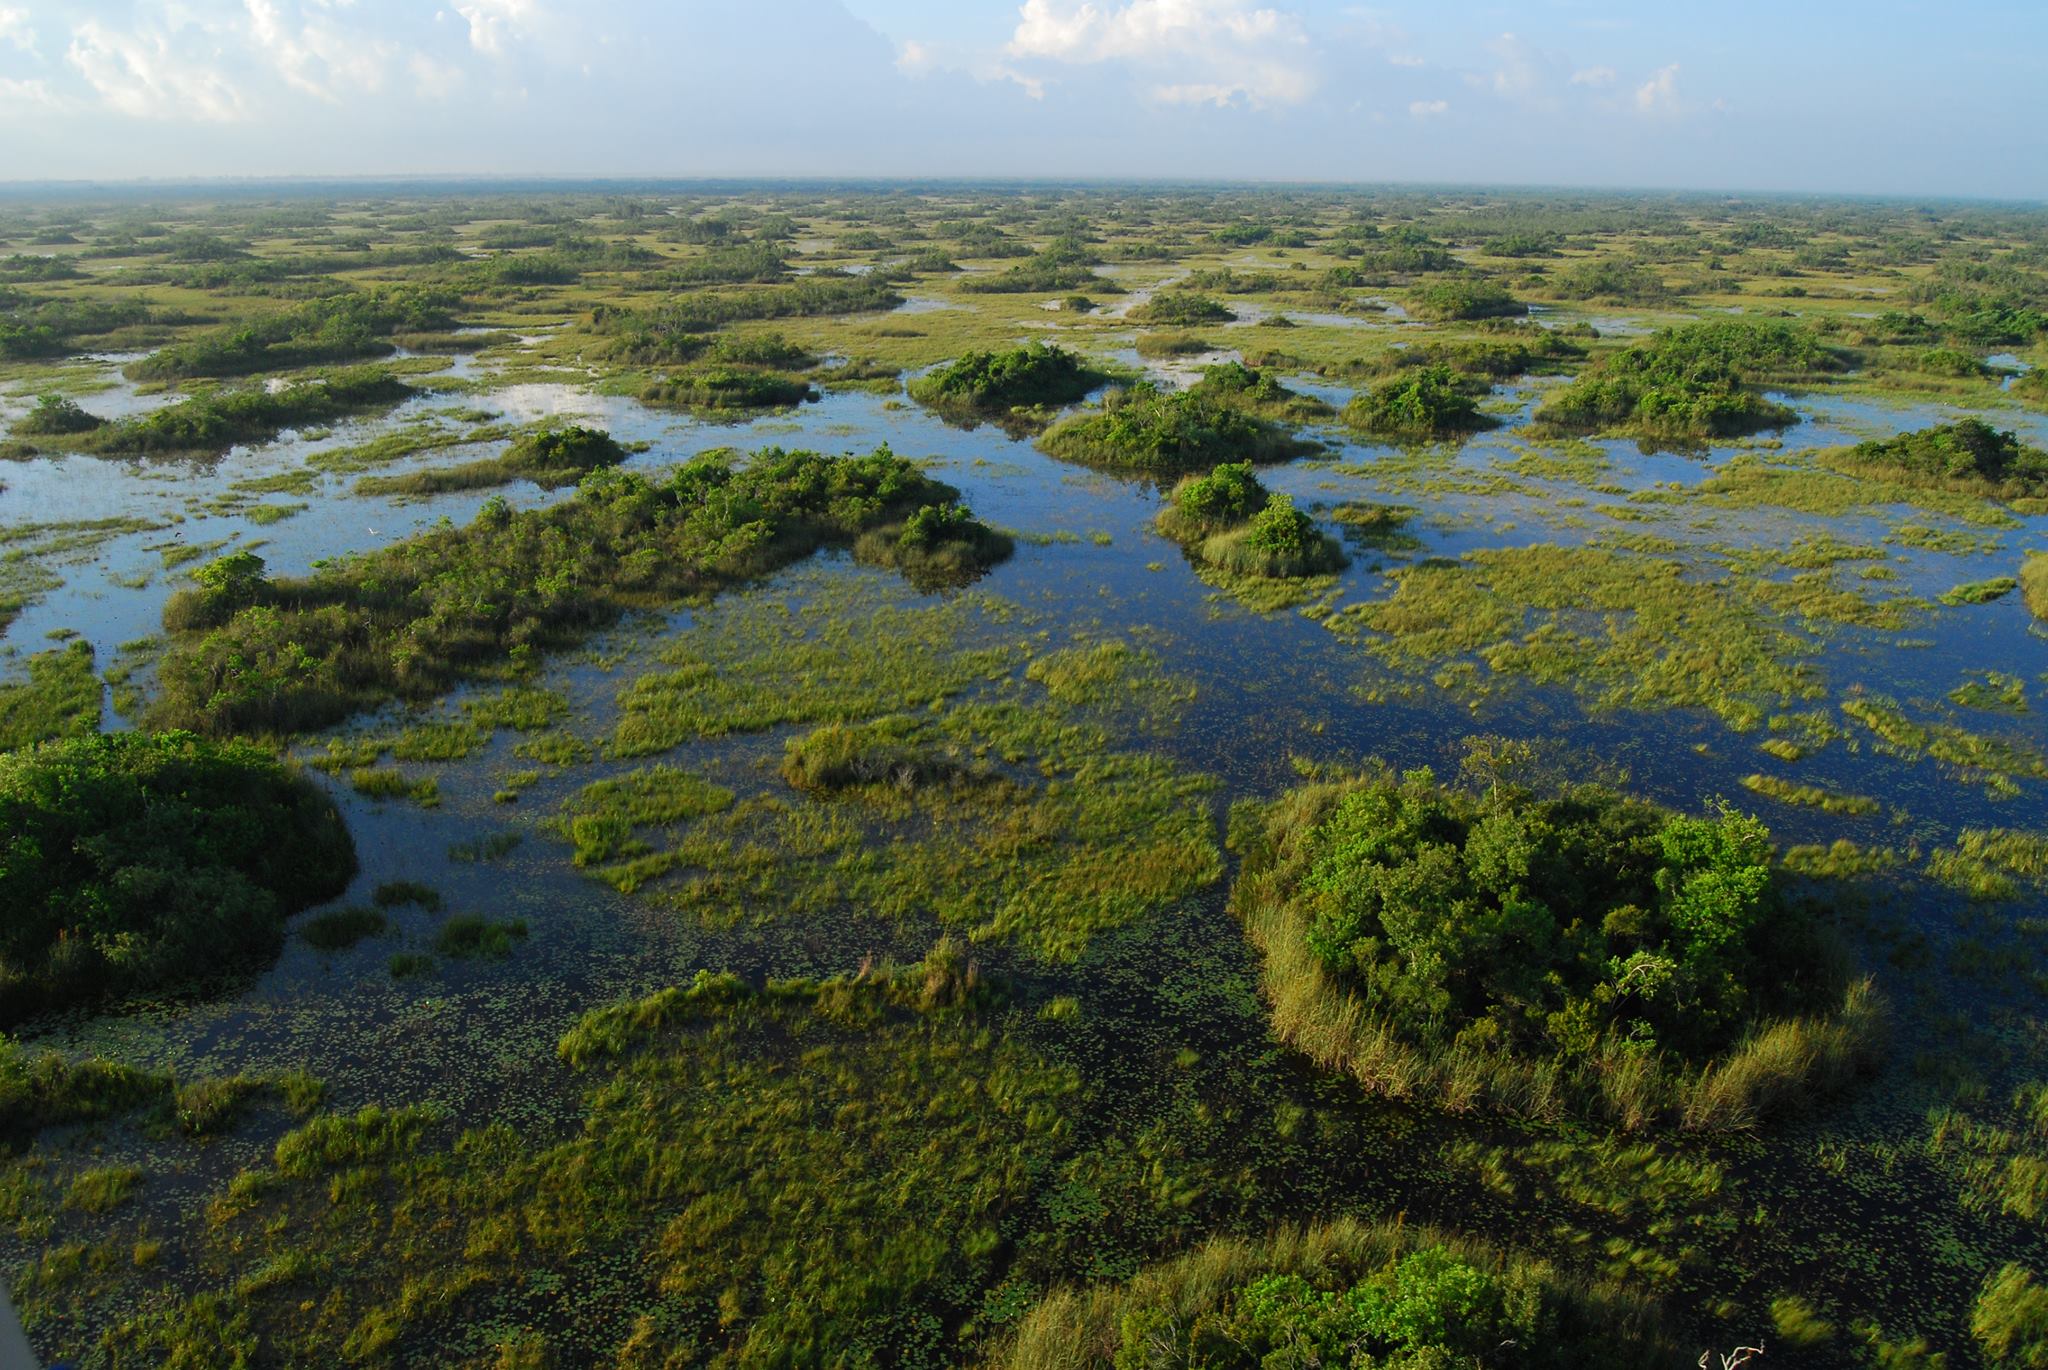 Aerial view of marshes and tree islands surrounded by water.